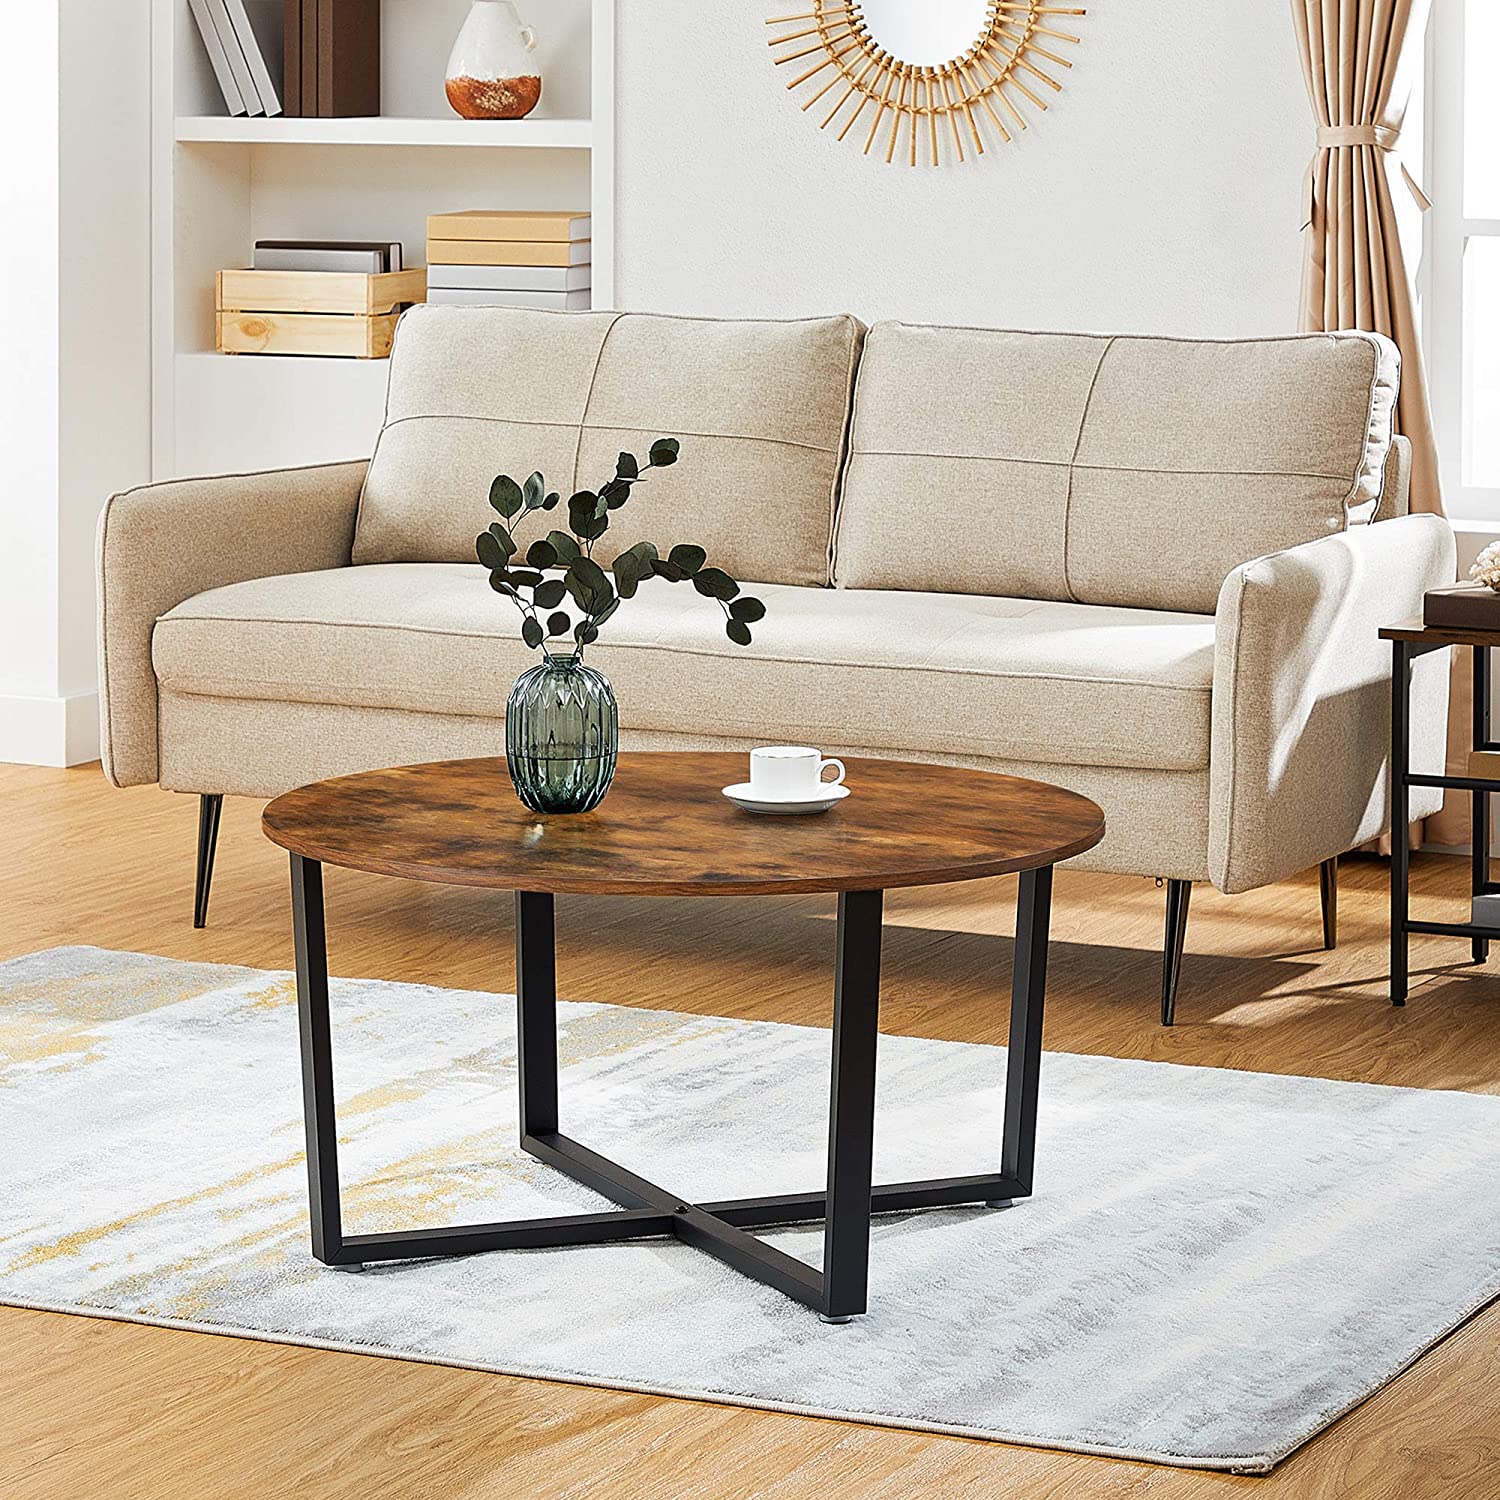 Round Coffee Table, Industrial Style Cocktail Table, Durable Metal Frame, Easy To Assemble, for Living Room